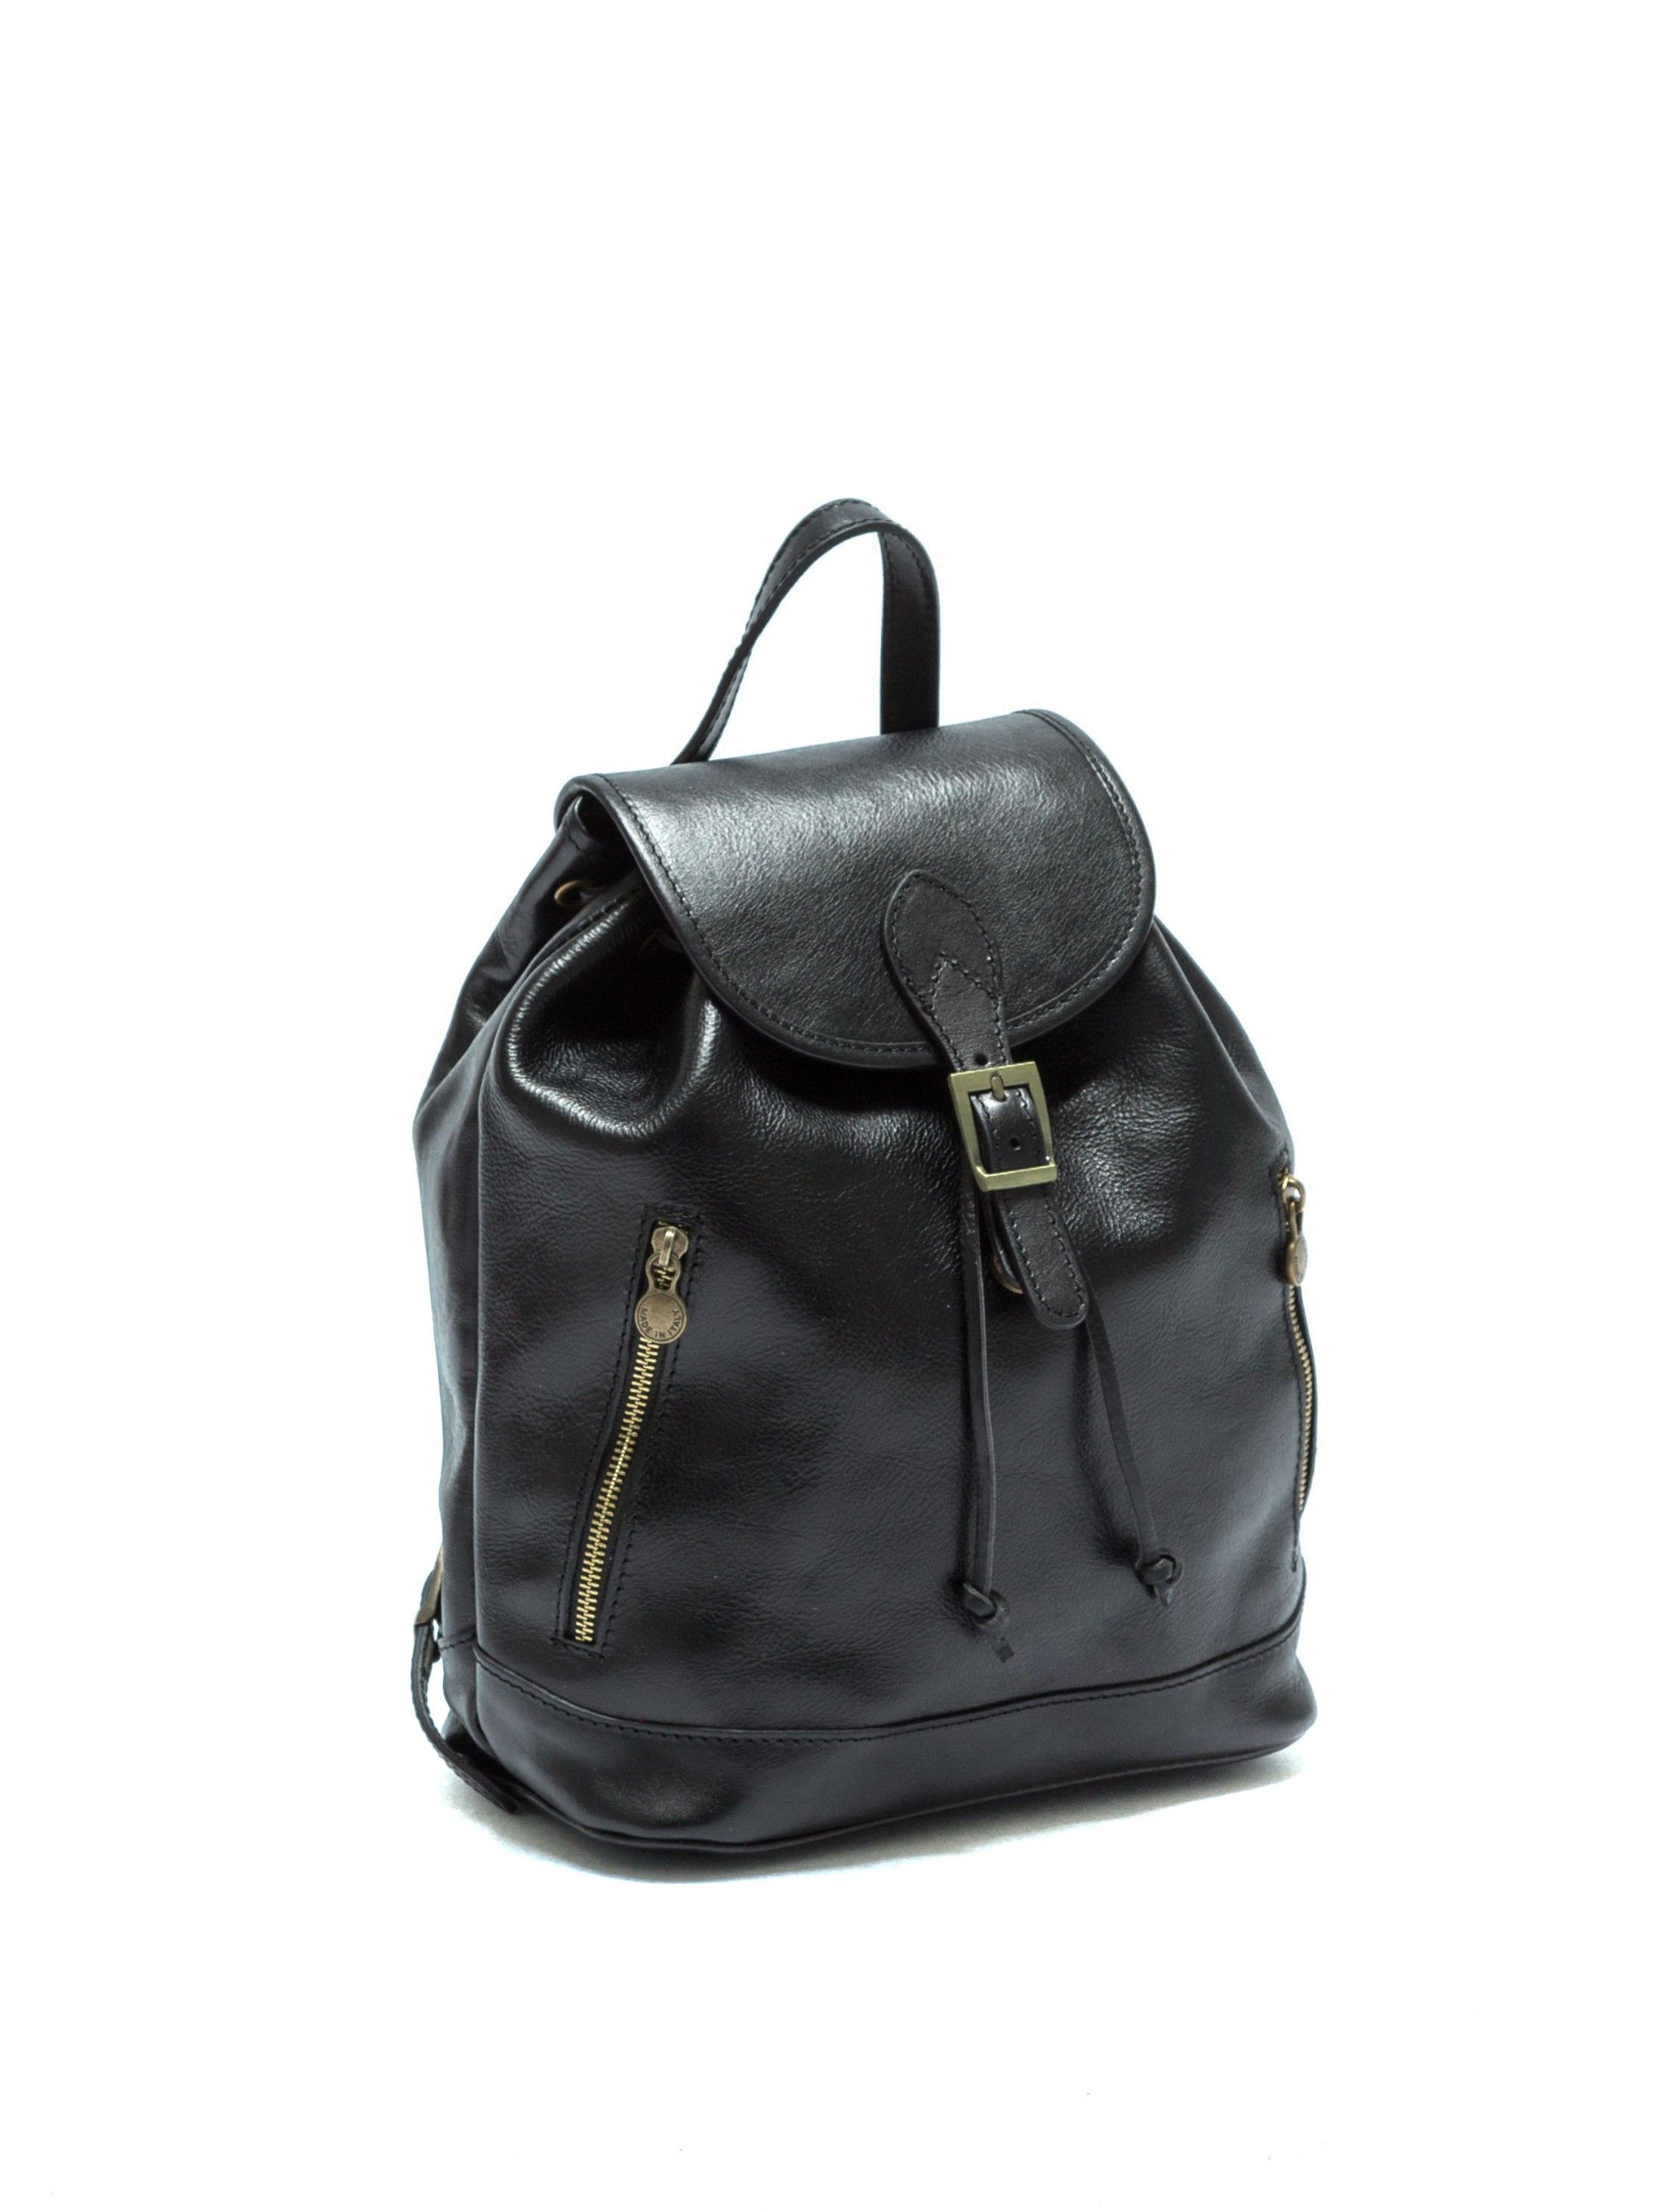 Backpack
Flap over with buckle closure
Drawstrings closure
Interior zip pocket
Adjustable shoulder straps
Composition: 100% cow leather
Brand metal plate
Dimensions (M): 32x36x14cm